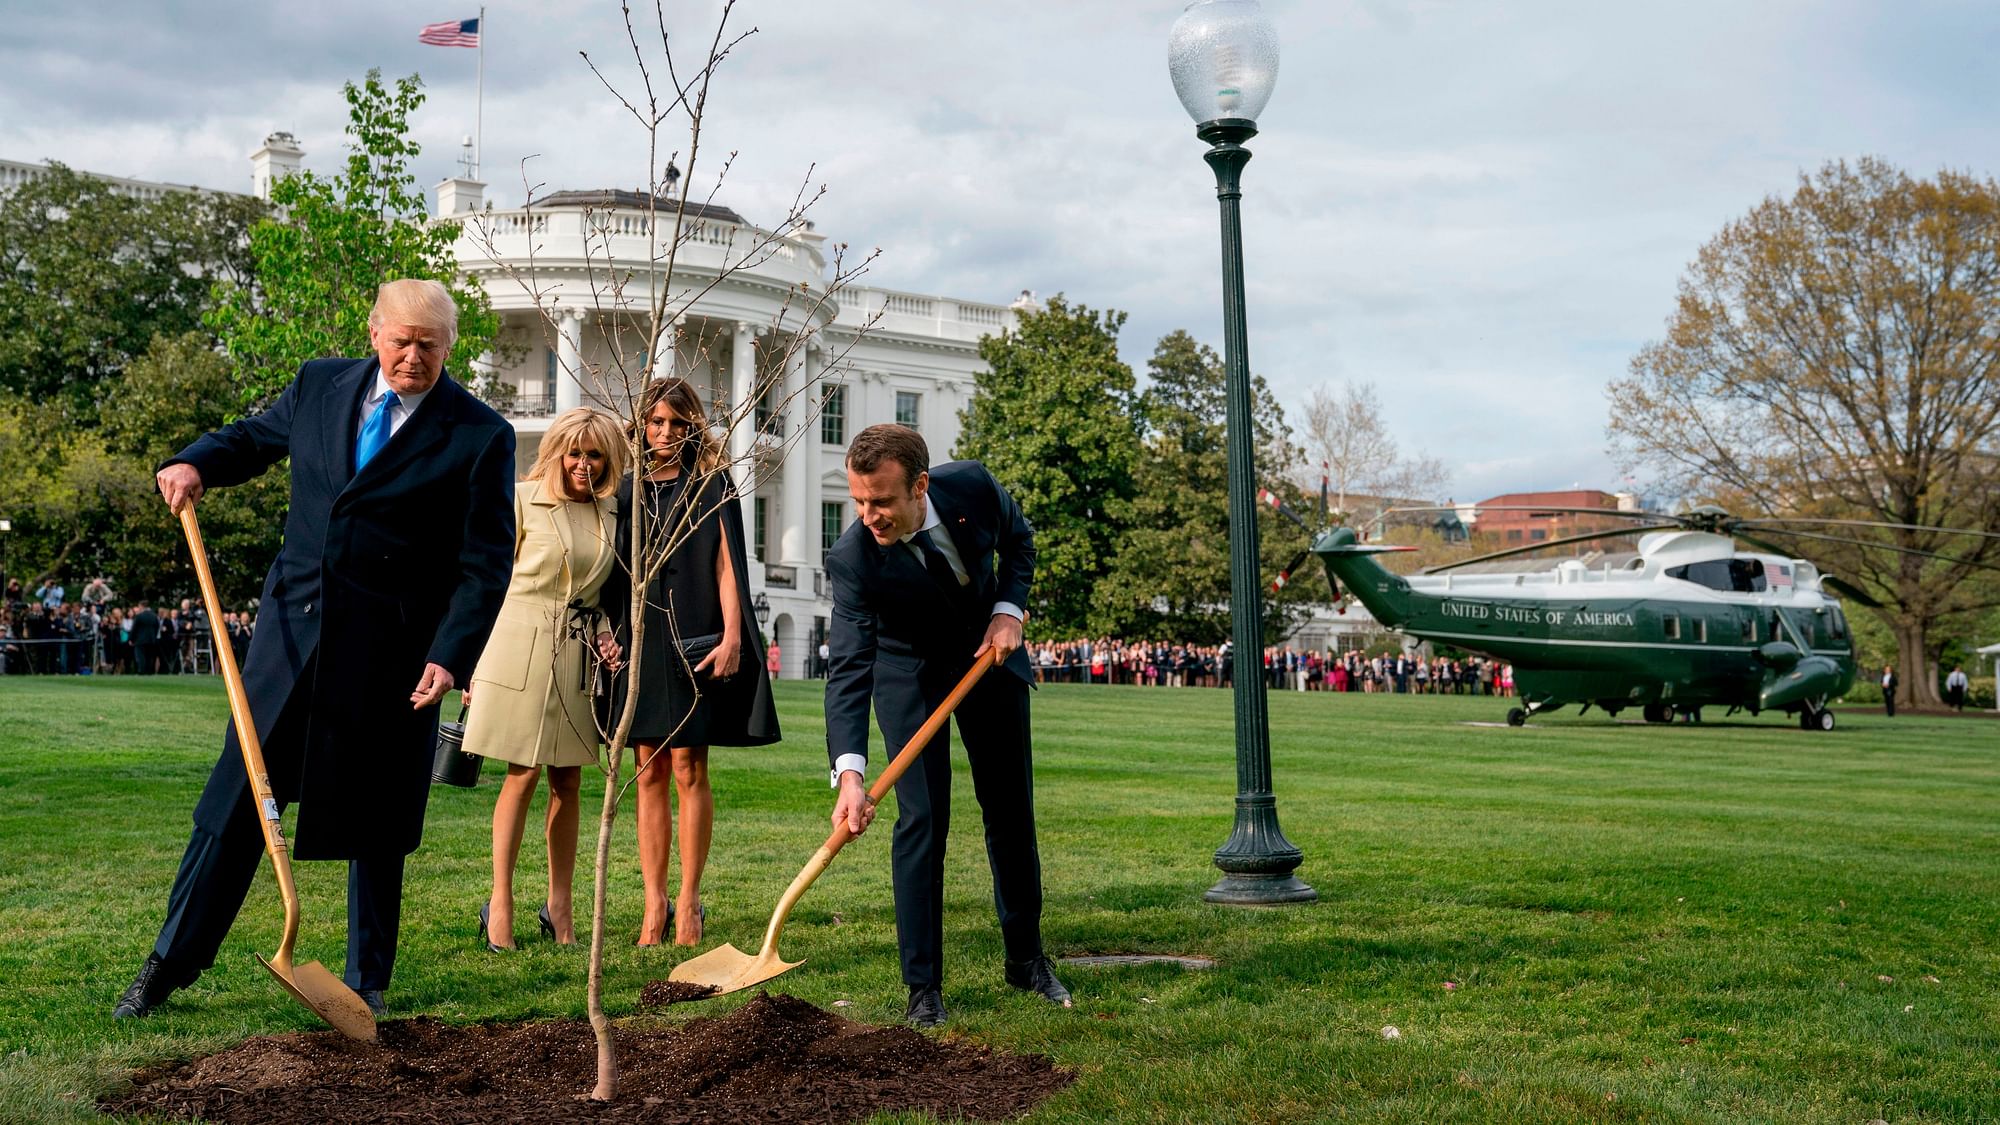 In this 23 April, 2018 file photo, Melania Trump, second right, and Brigitte Macron, second left, watch as President Donald Trump and French President Emmanuel Macron participate in a tree planting ceremony on the South Lawn of the White House in Washington.